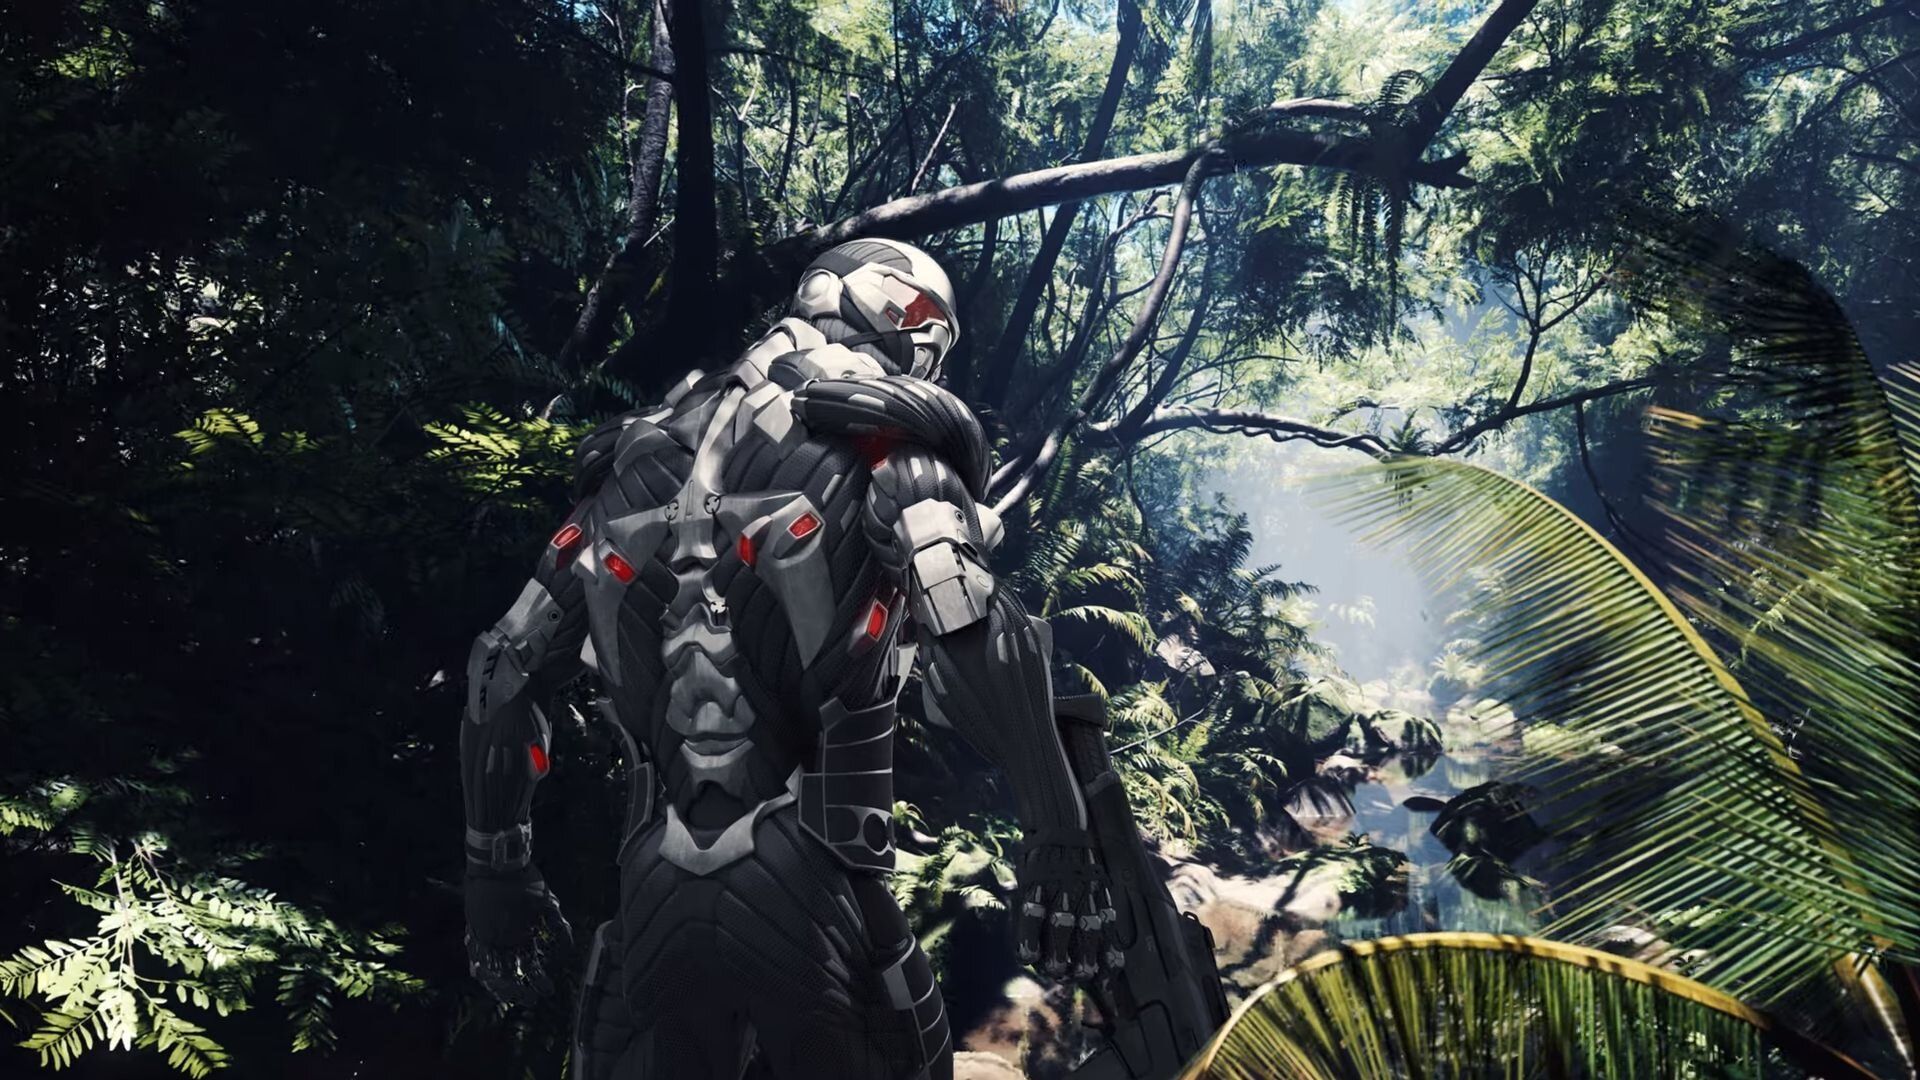 CRYSIS REMASTERED is on Its Gorgeous Way to PC and Console